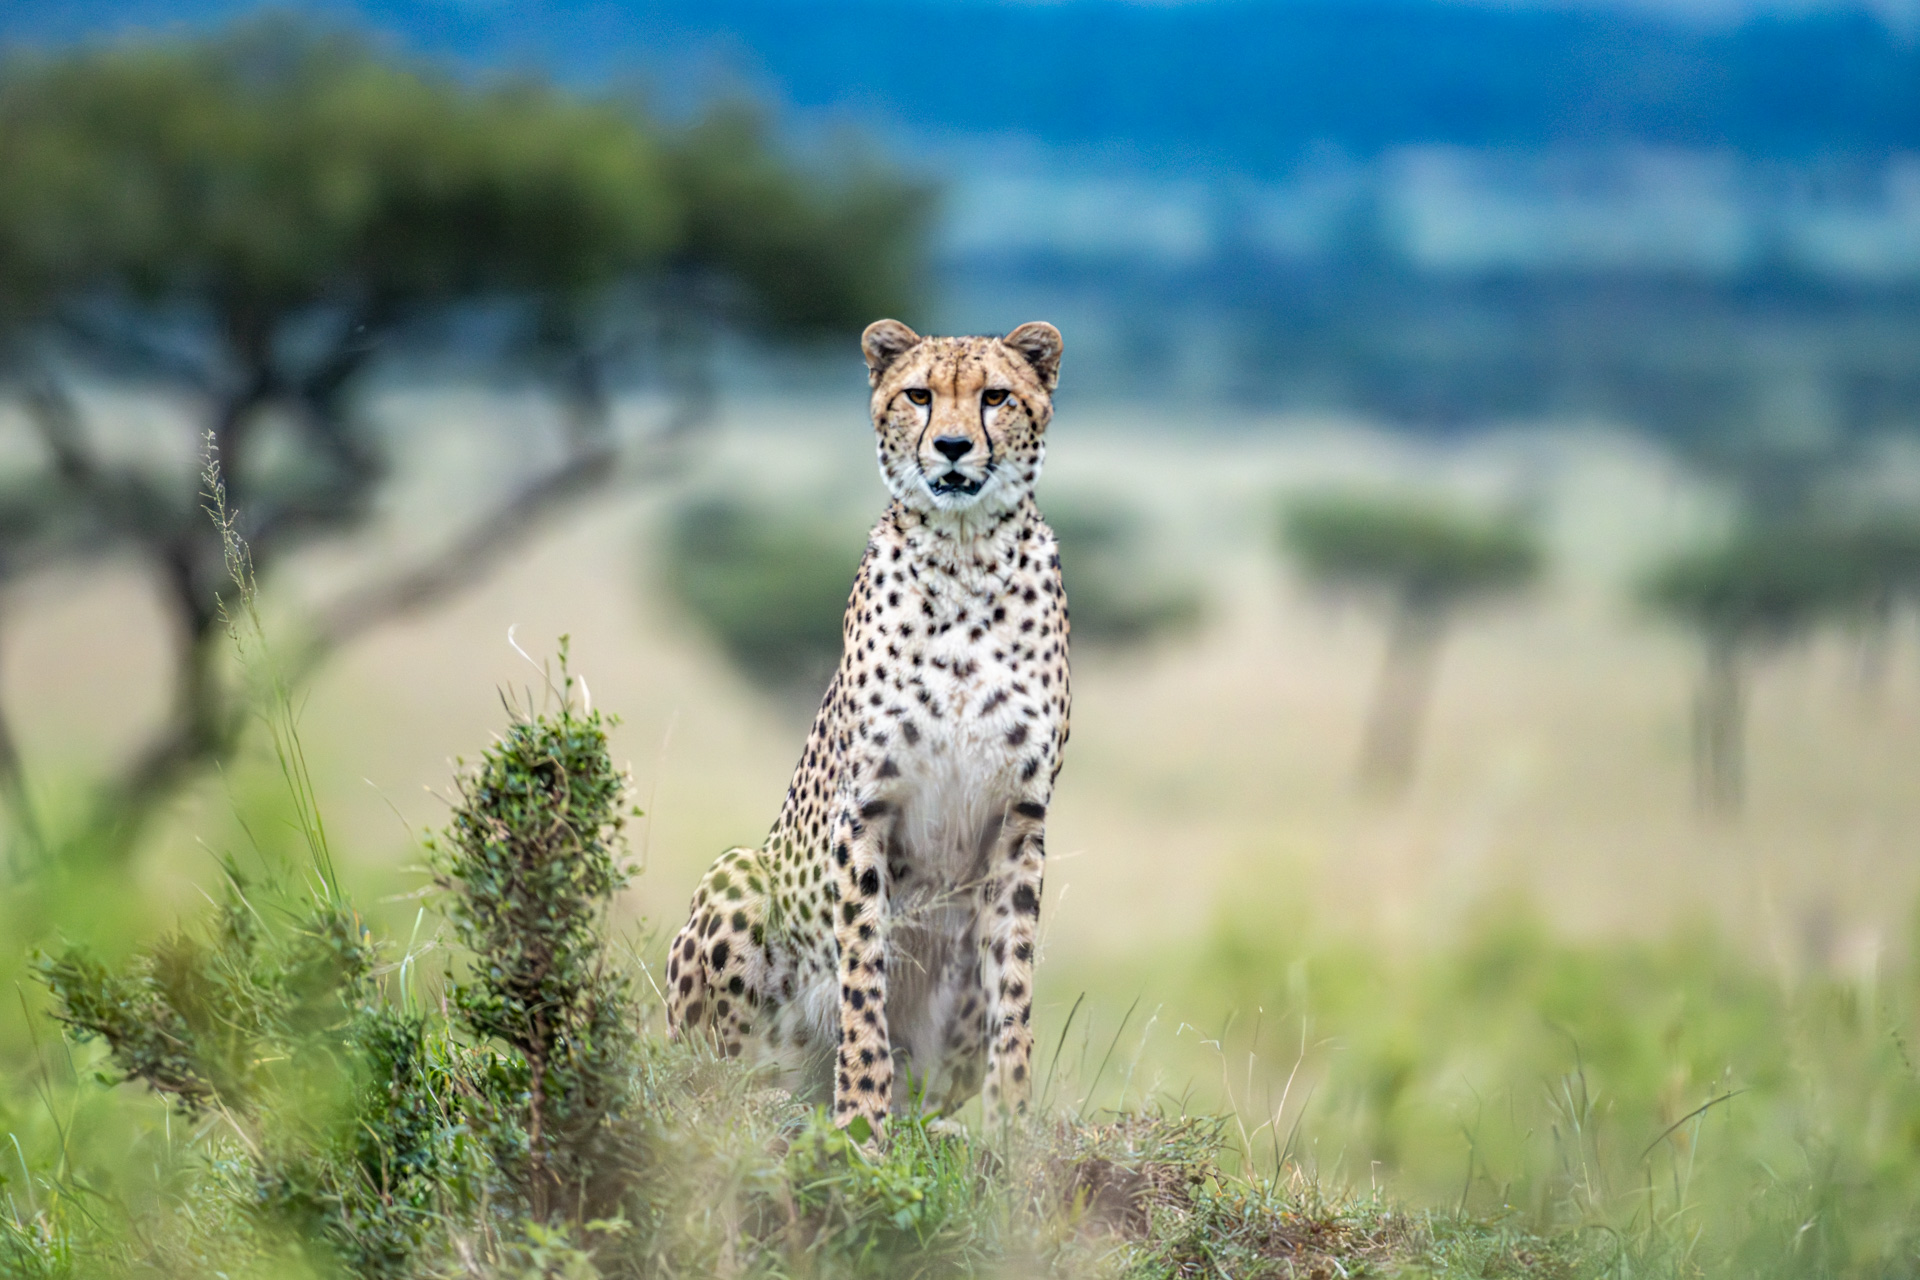 A male cheetah uses a termite mound to scout out his surroundings